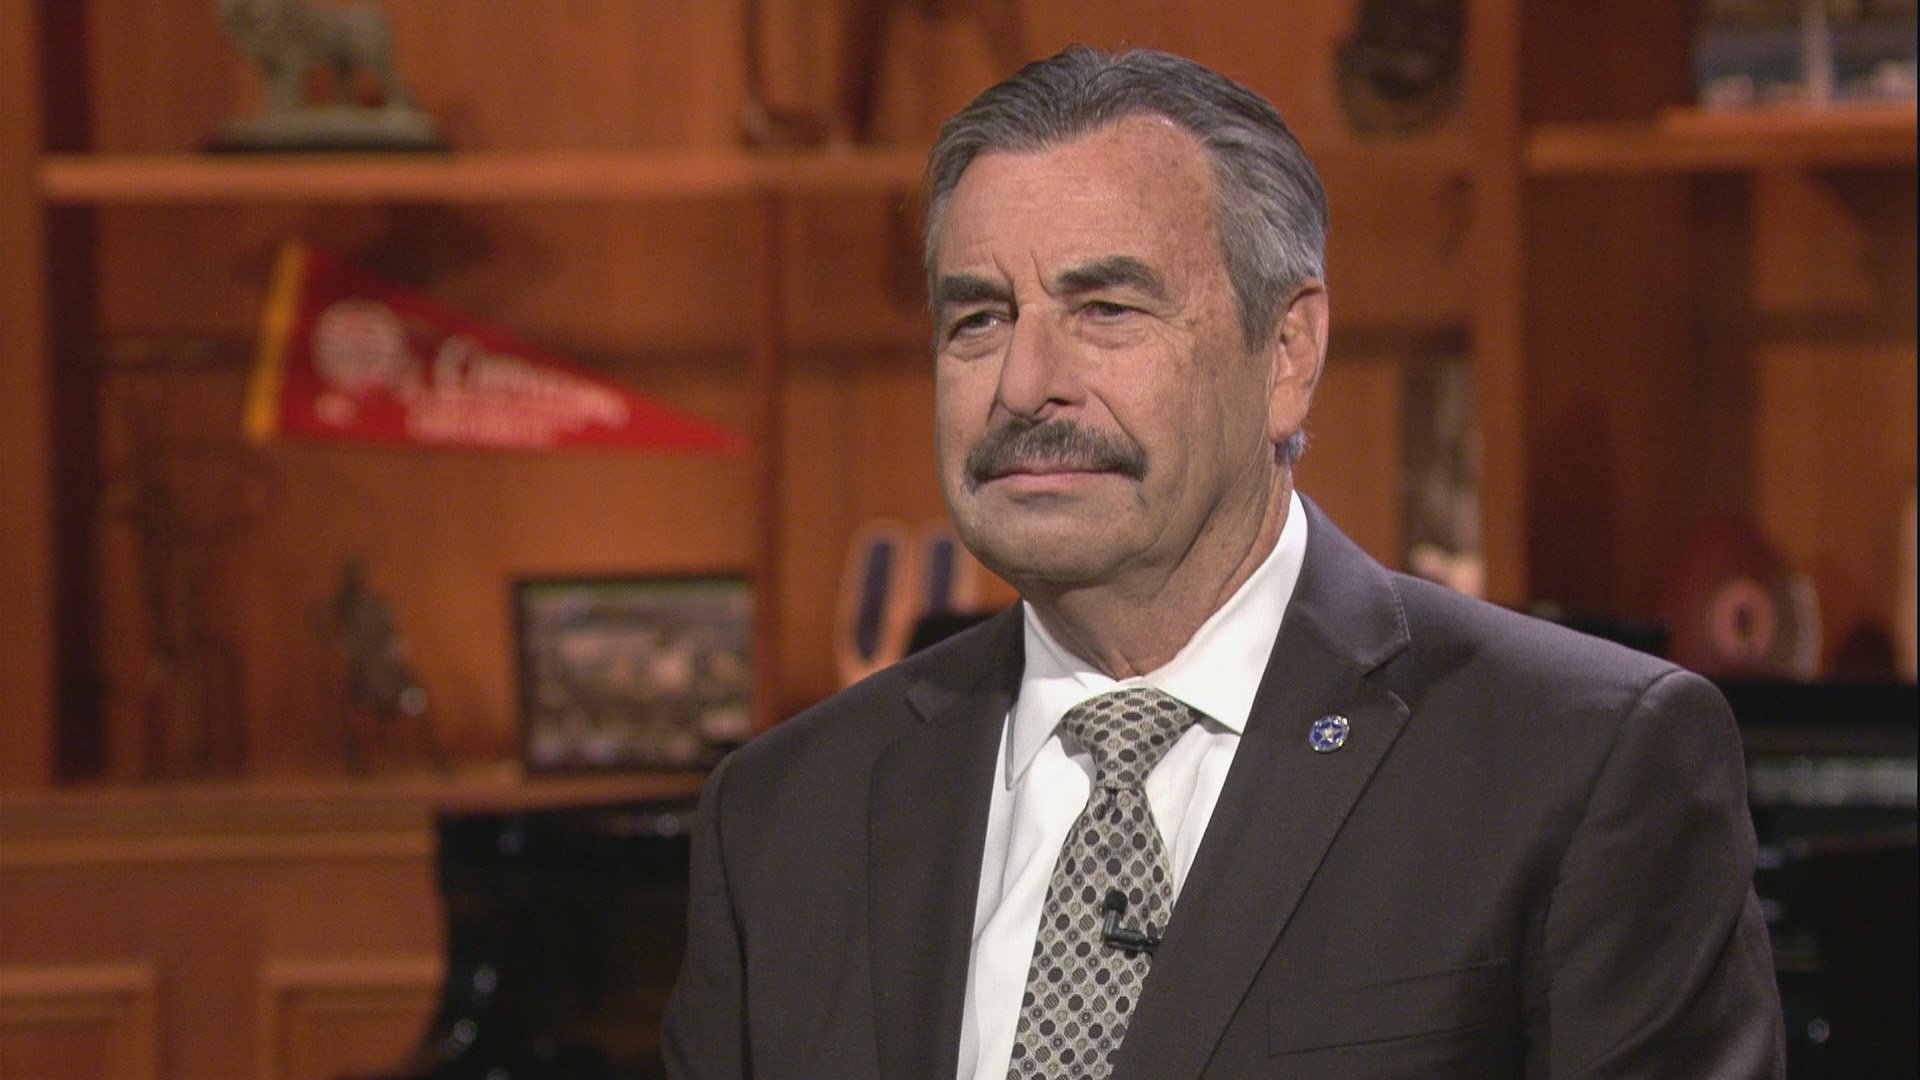 Interim Chicago Police Superintendent Charlie Beck appears on “Chicago Tonight” on Wednesday, Jan. 15, 2020. (WTTW News)